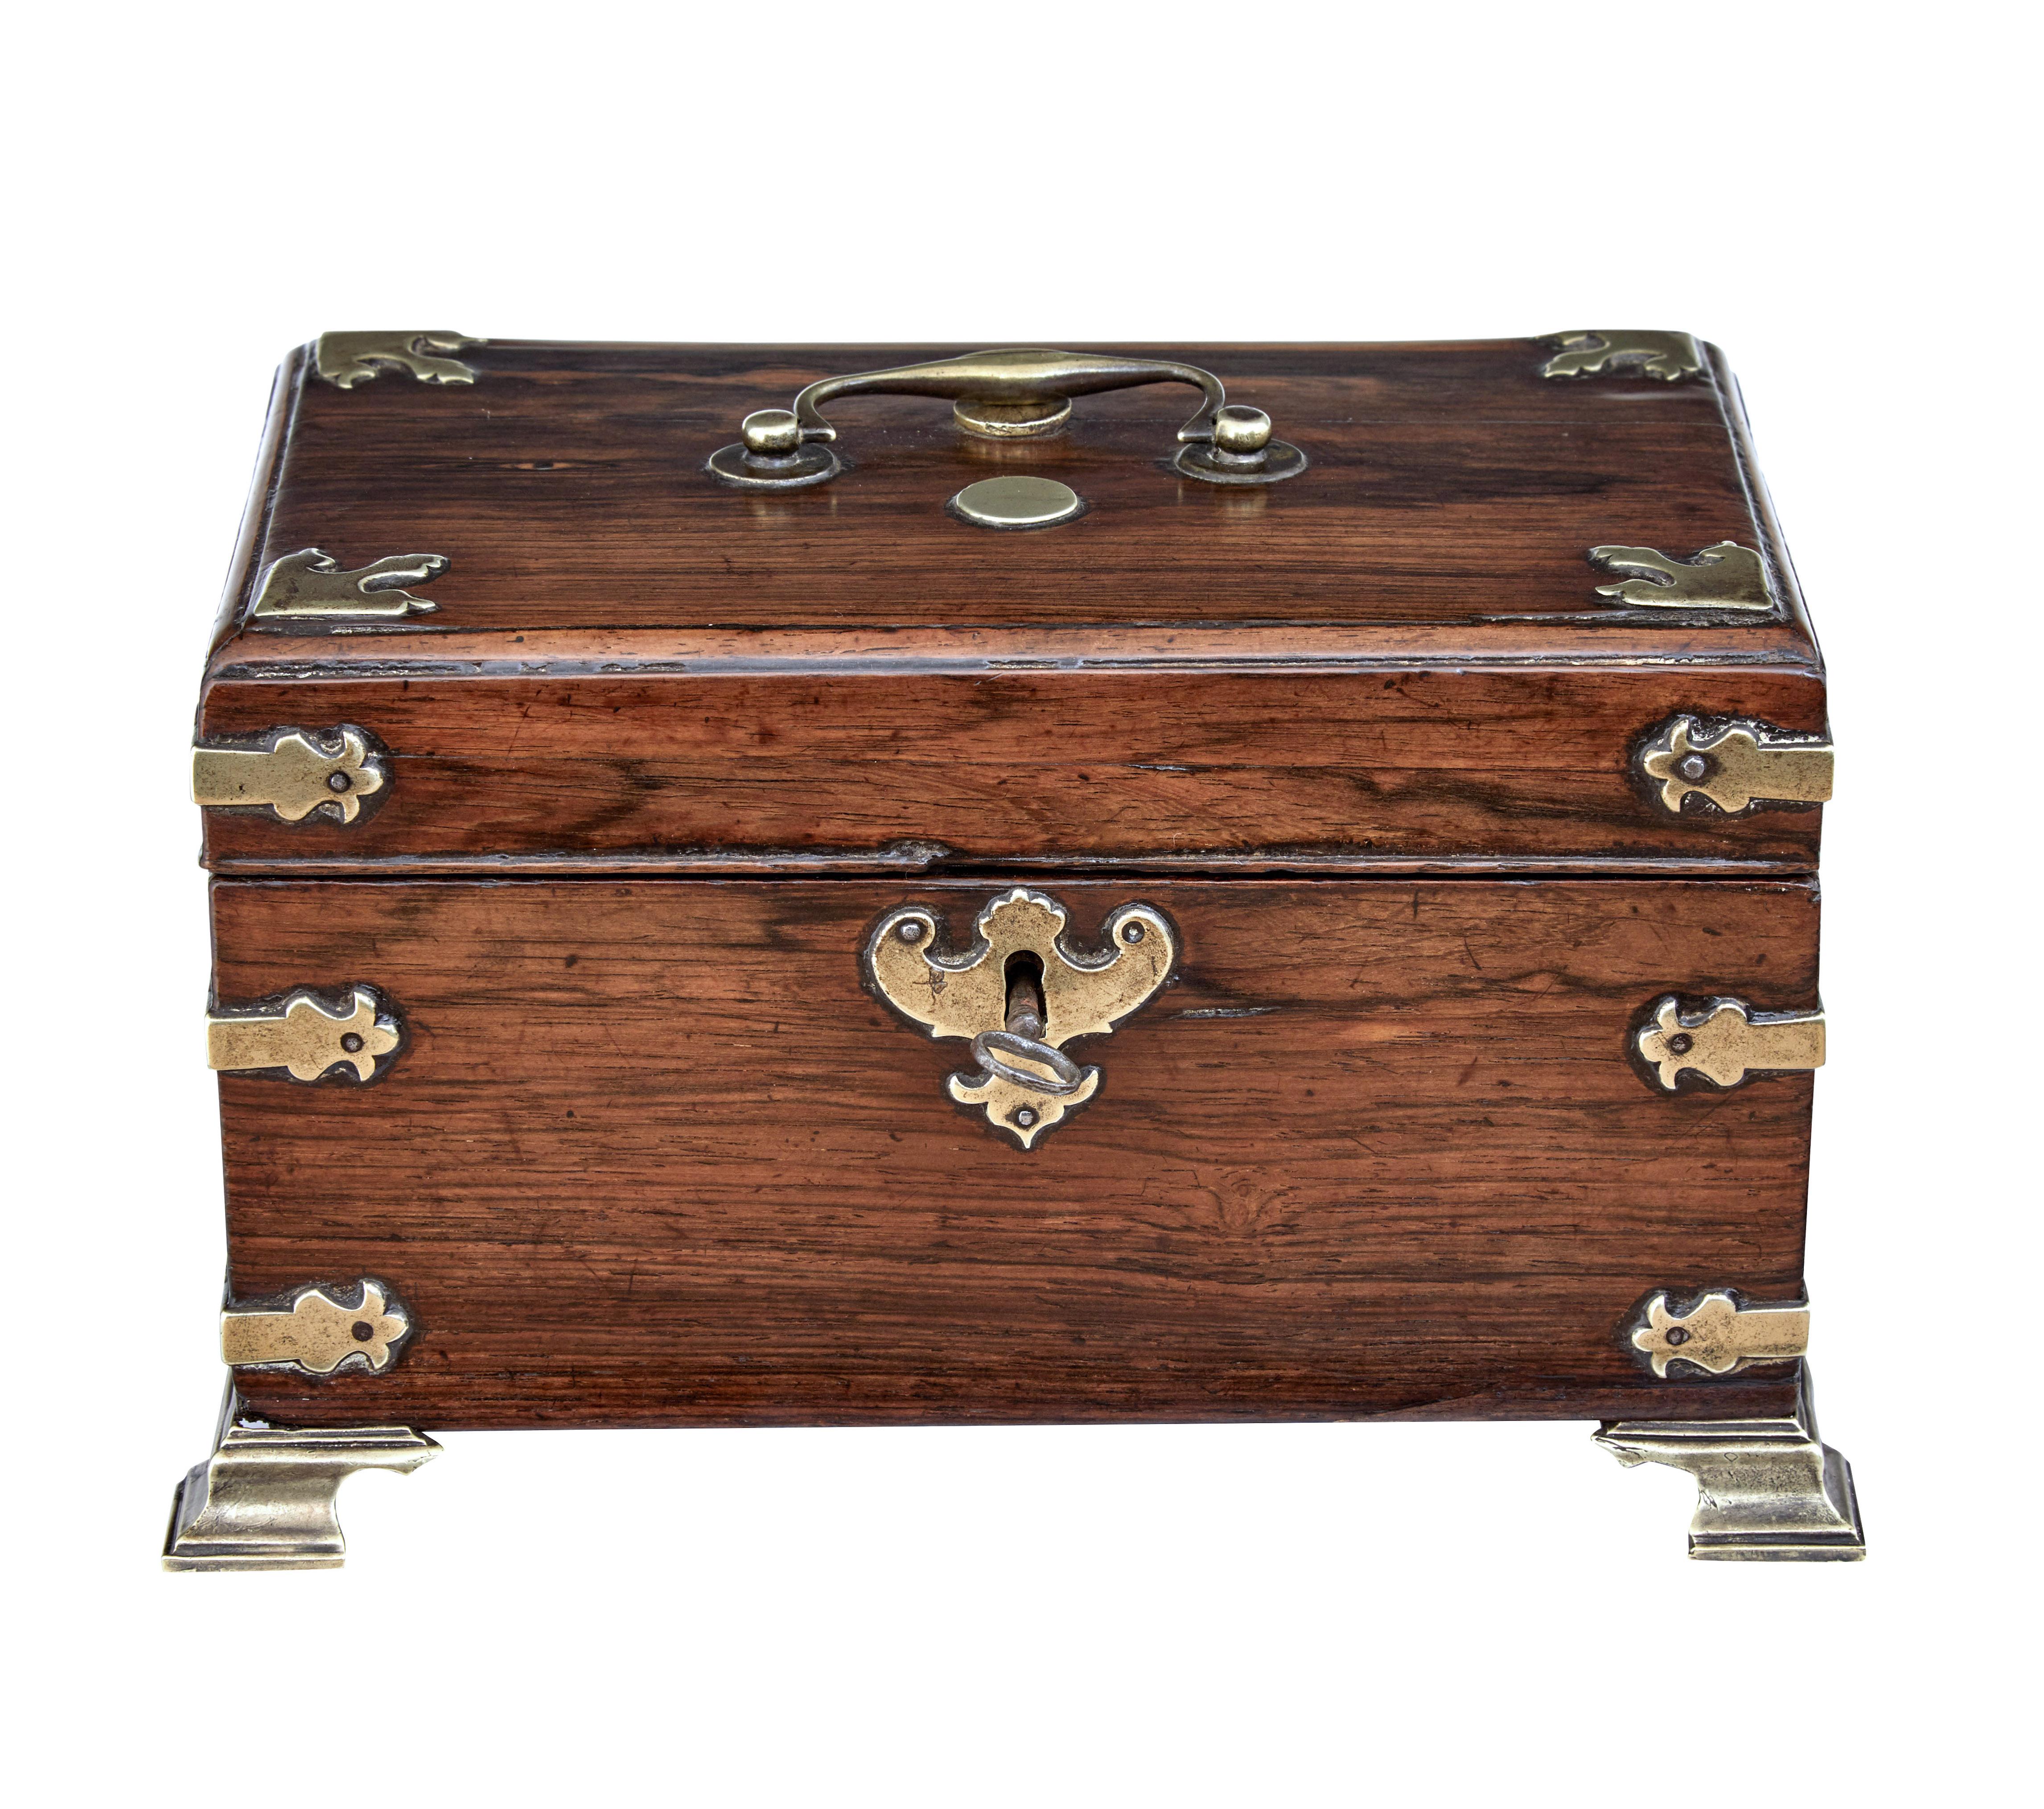 Early 19th century Georgian palisander and brass tea caddy circa.

Fine quality tea caddy from the late georgian made in palisander from the rosewood family.  Decorated with brass embellishments and handle to the top.  Complete with brass